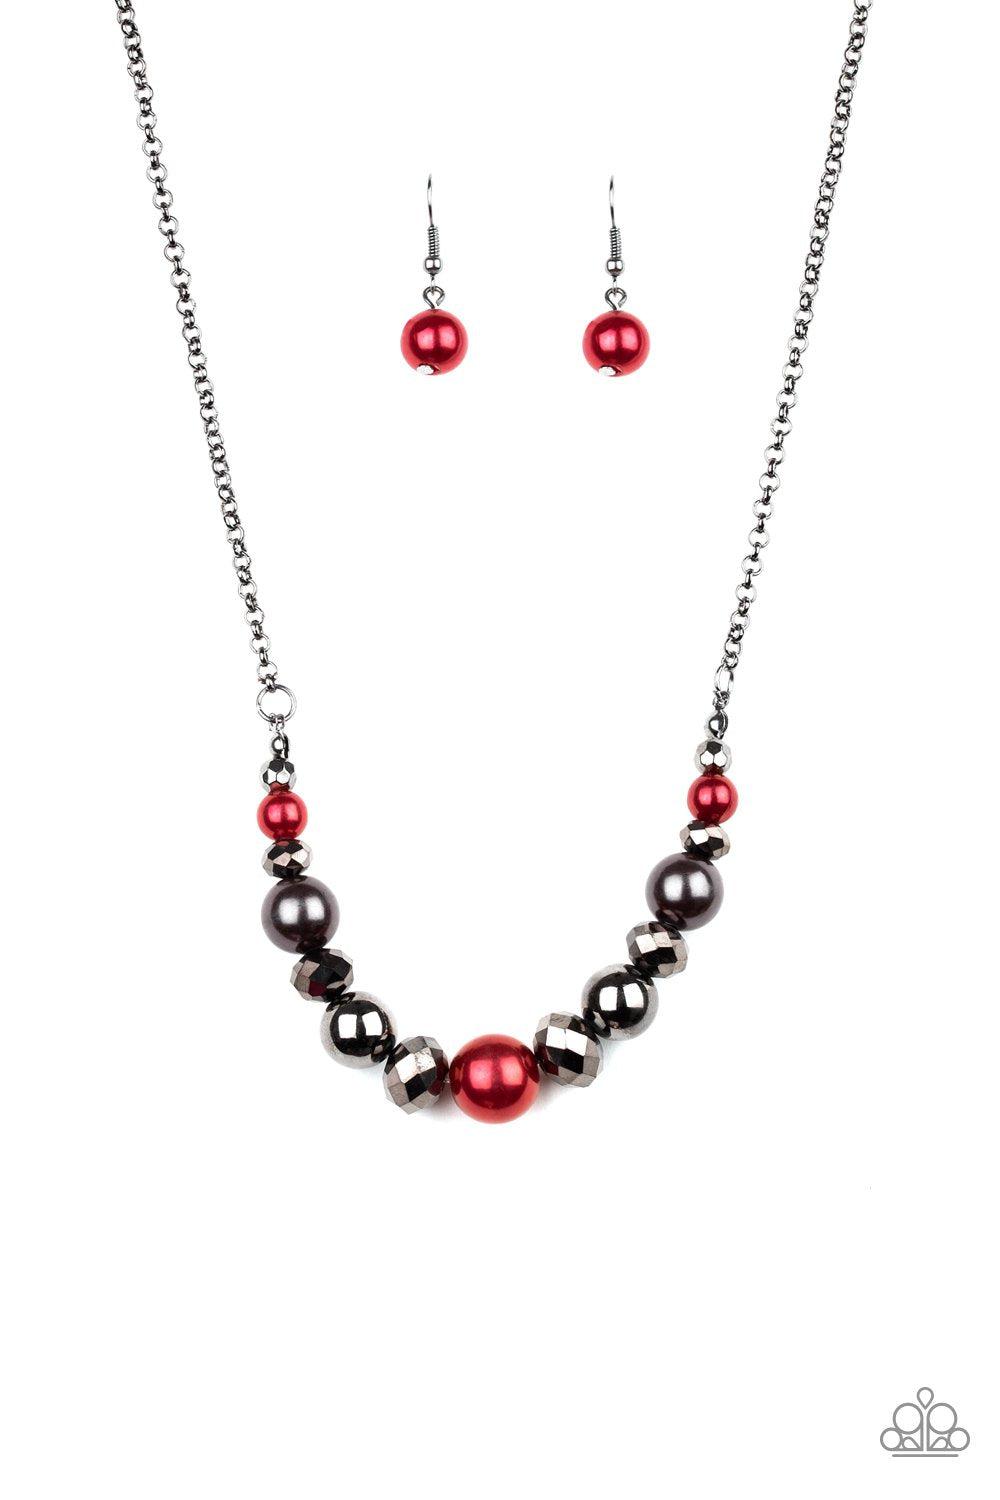 The Big Leaguer Multi - Red, Hematite and Gunmetal Pearl Necklace - Paparazzi Accessories - lightbox -CarasShop.com - $5 Jewelry by Cara Jewels